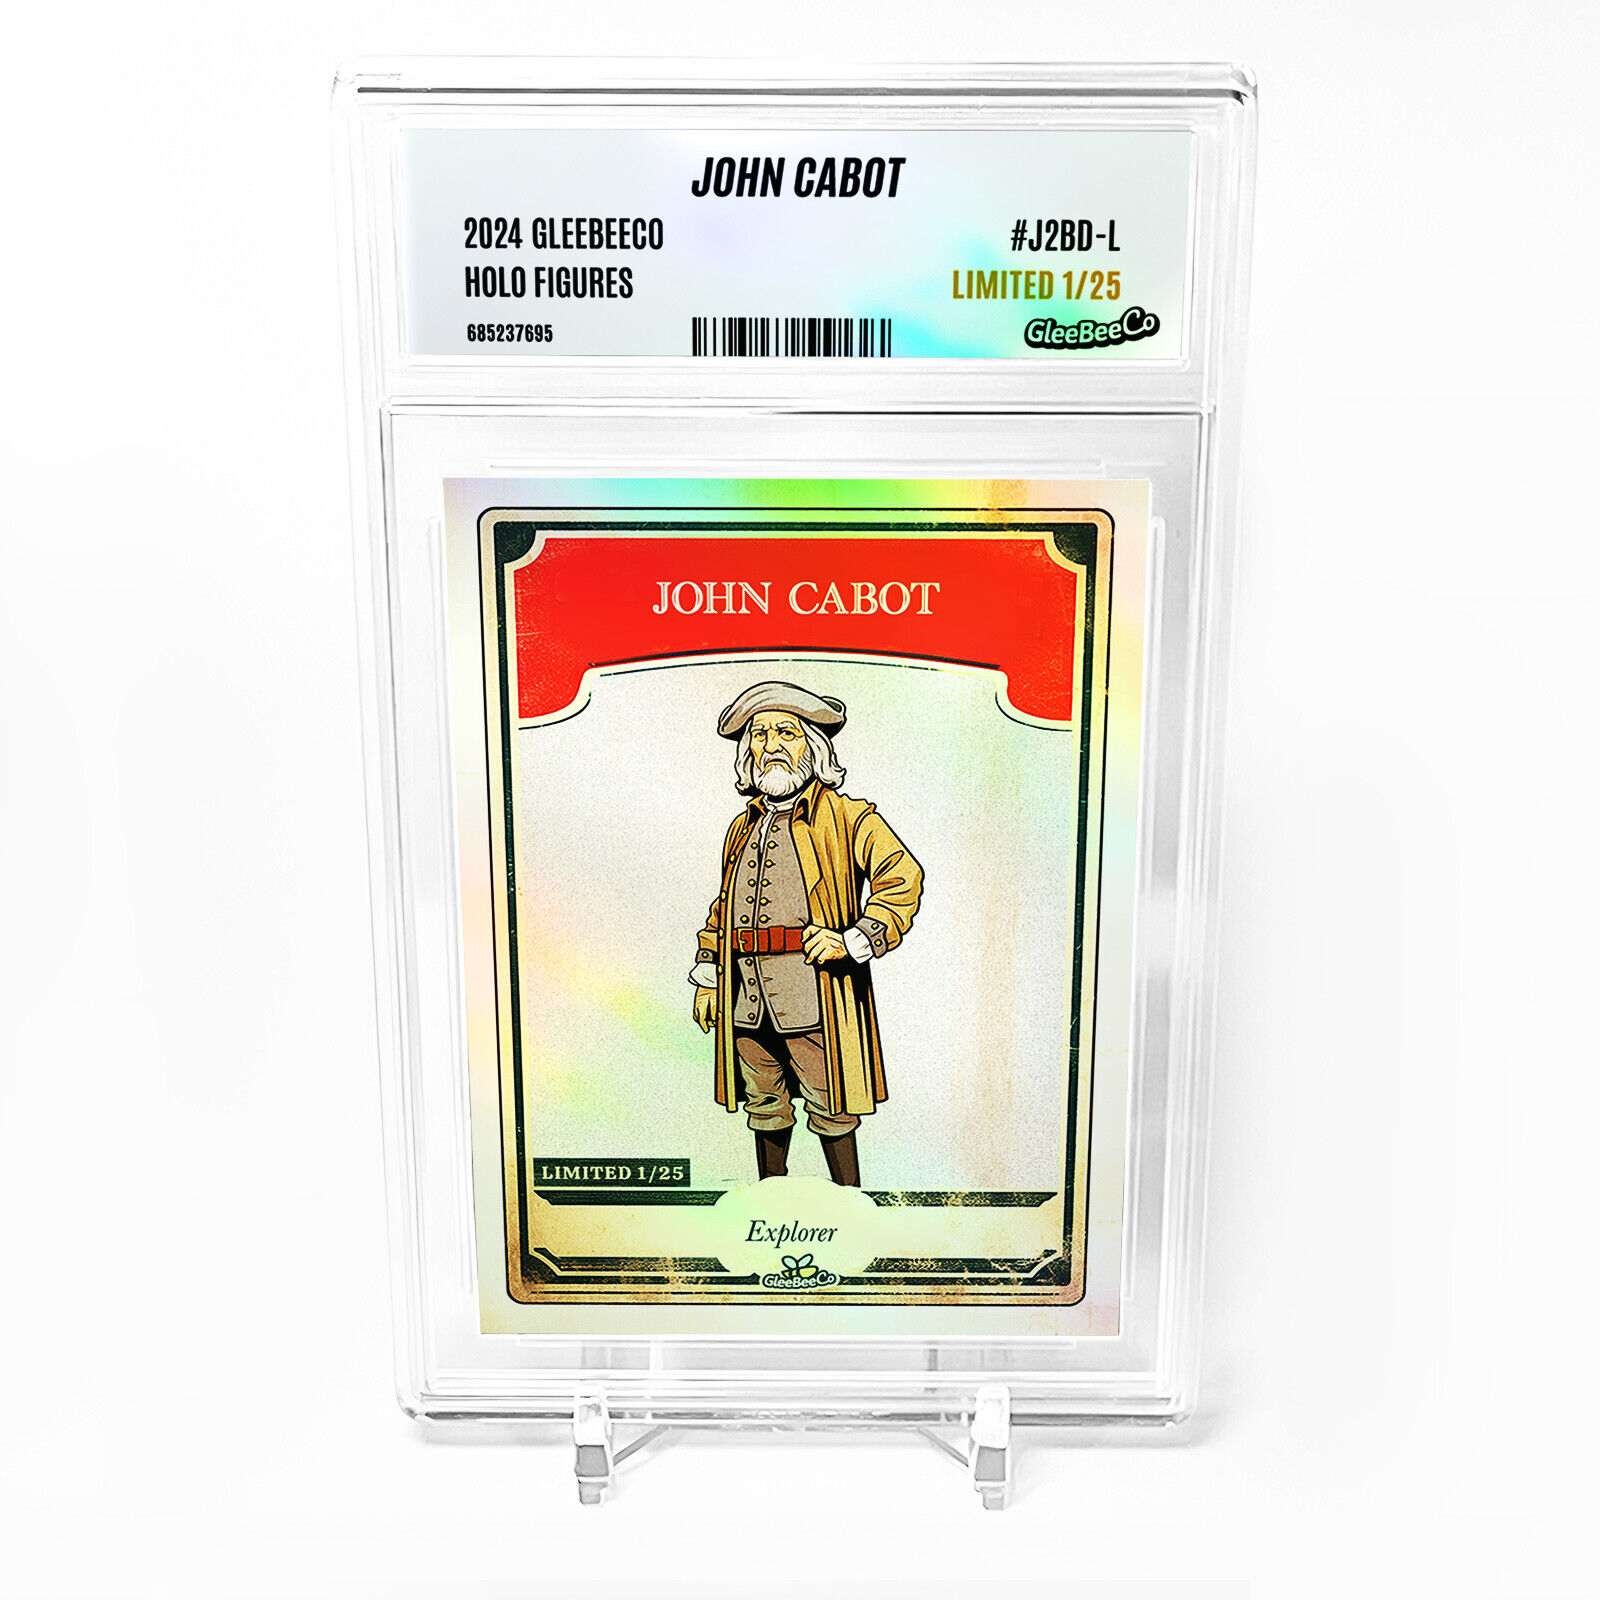 JOHN CABOT Card 2024 GleeBeeCo Holo Figures Slabbed Caricature #J2BD-L Only /25